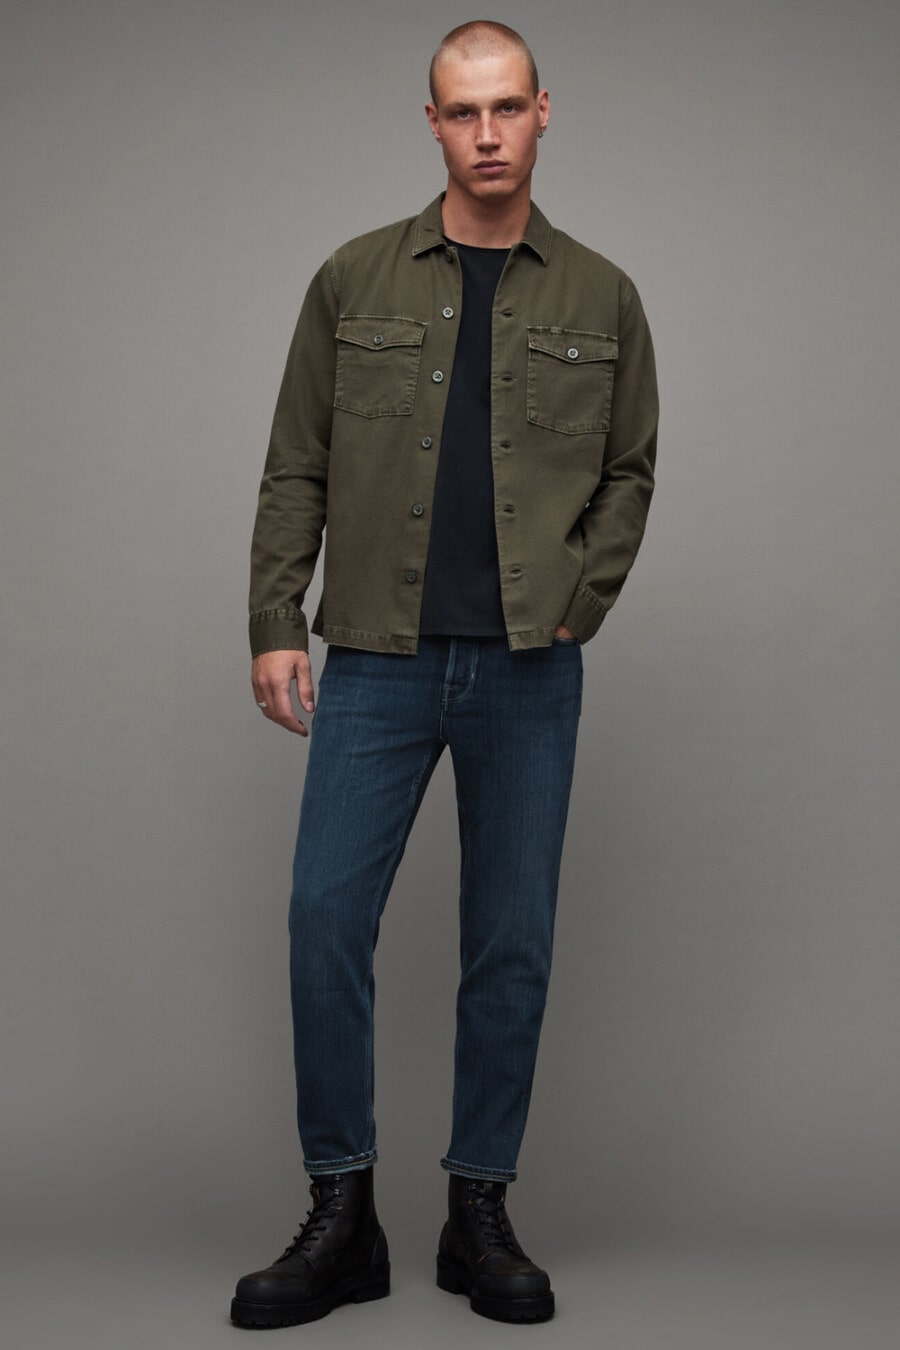 Men's blue jeans, charcoal T-shirt, green cotton shacket and black military boots outfit